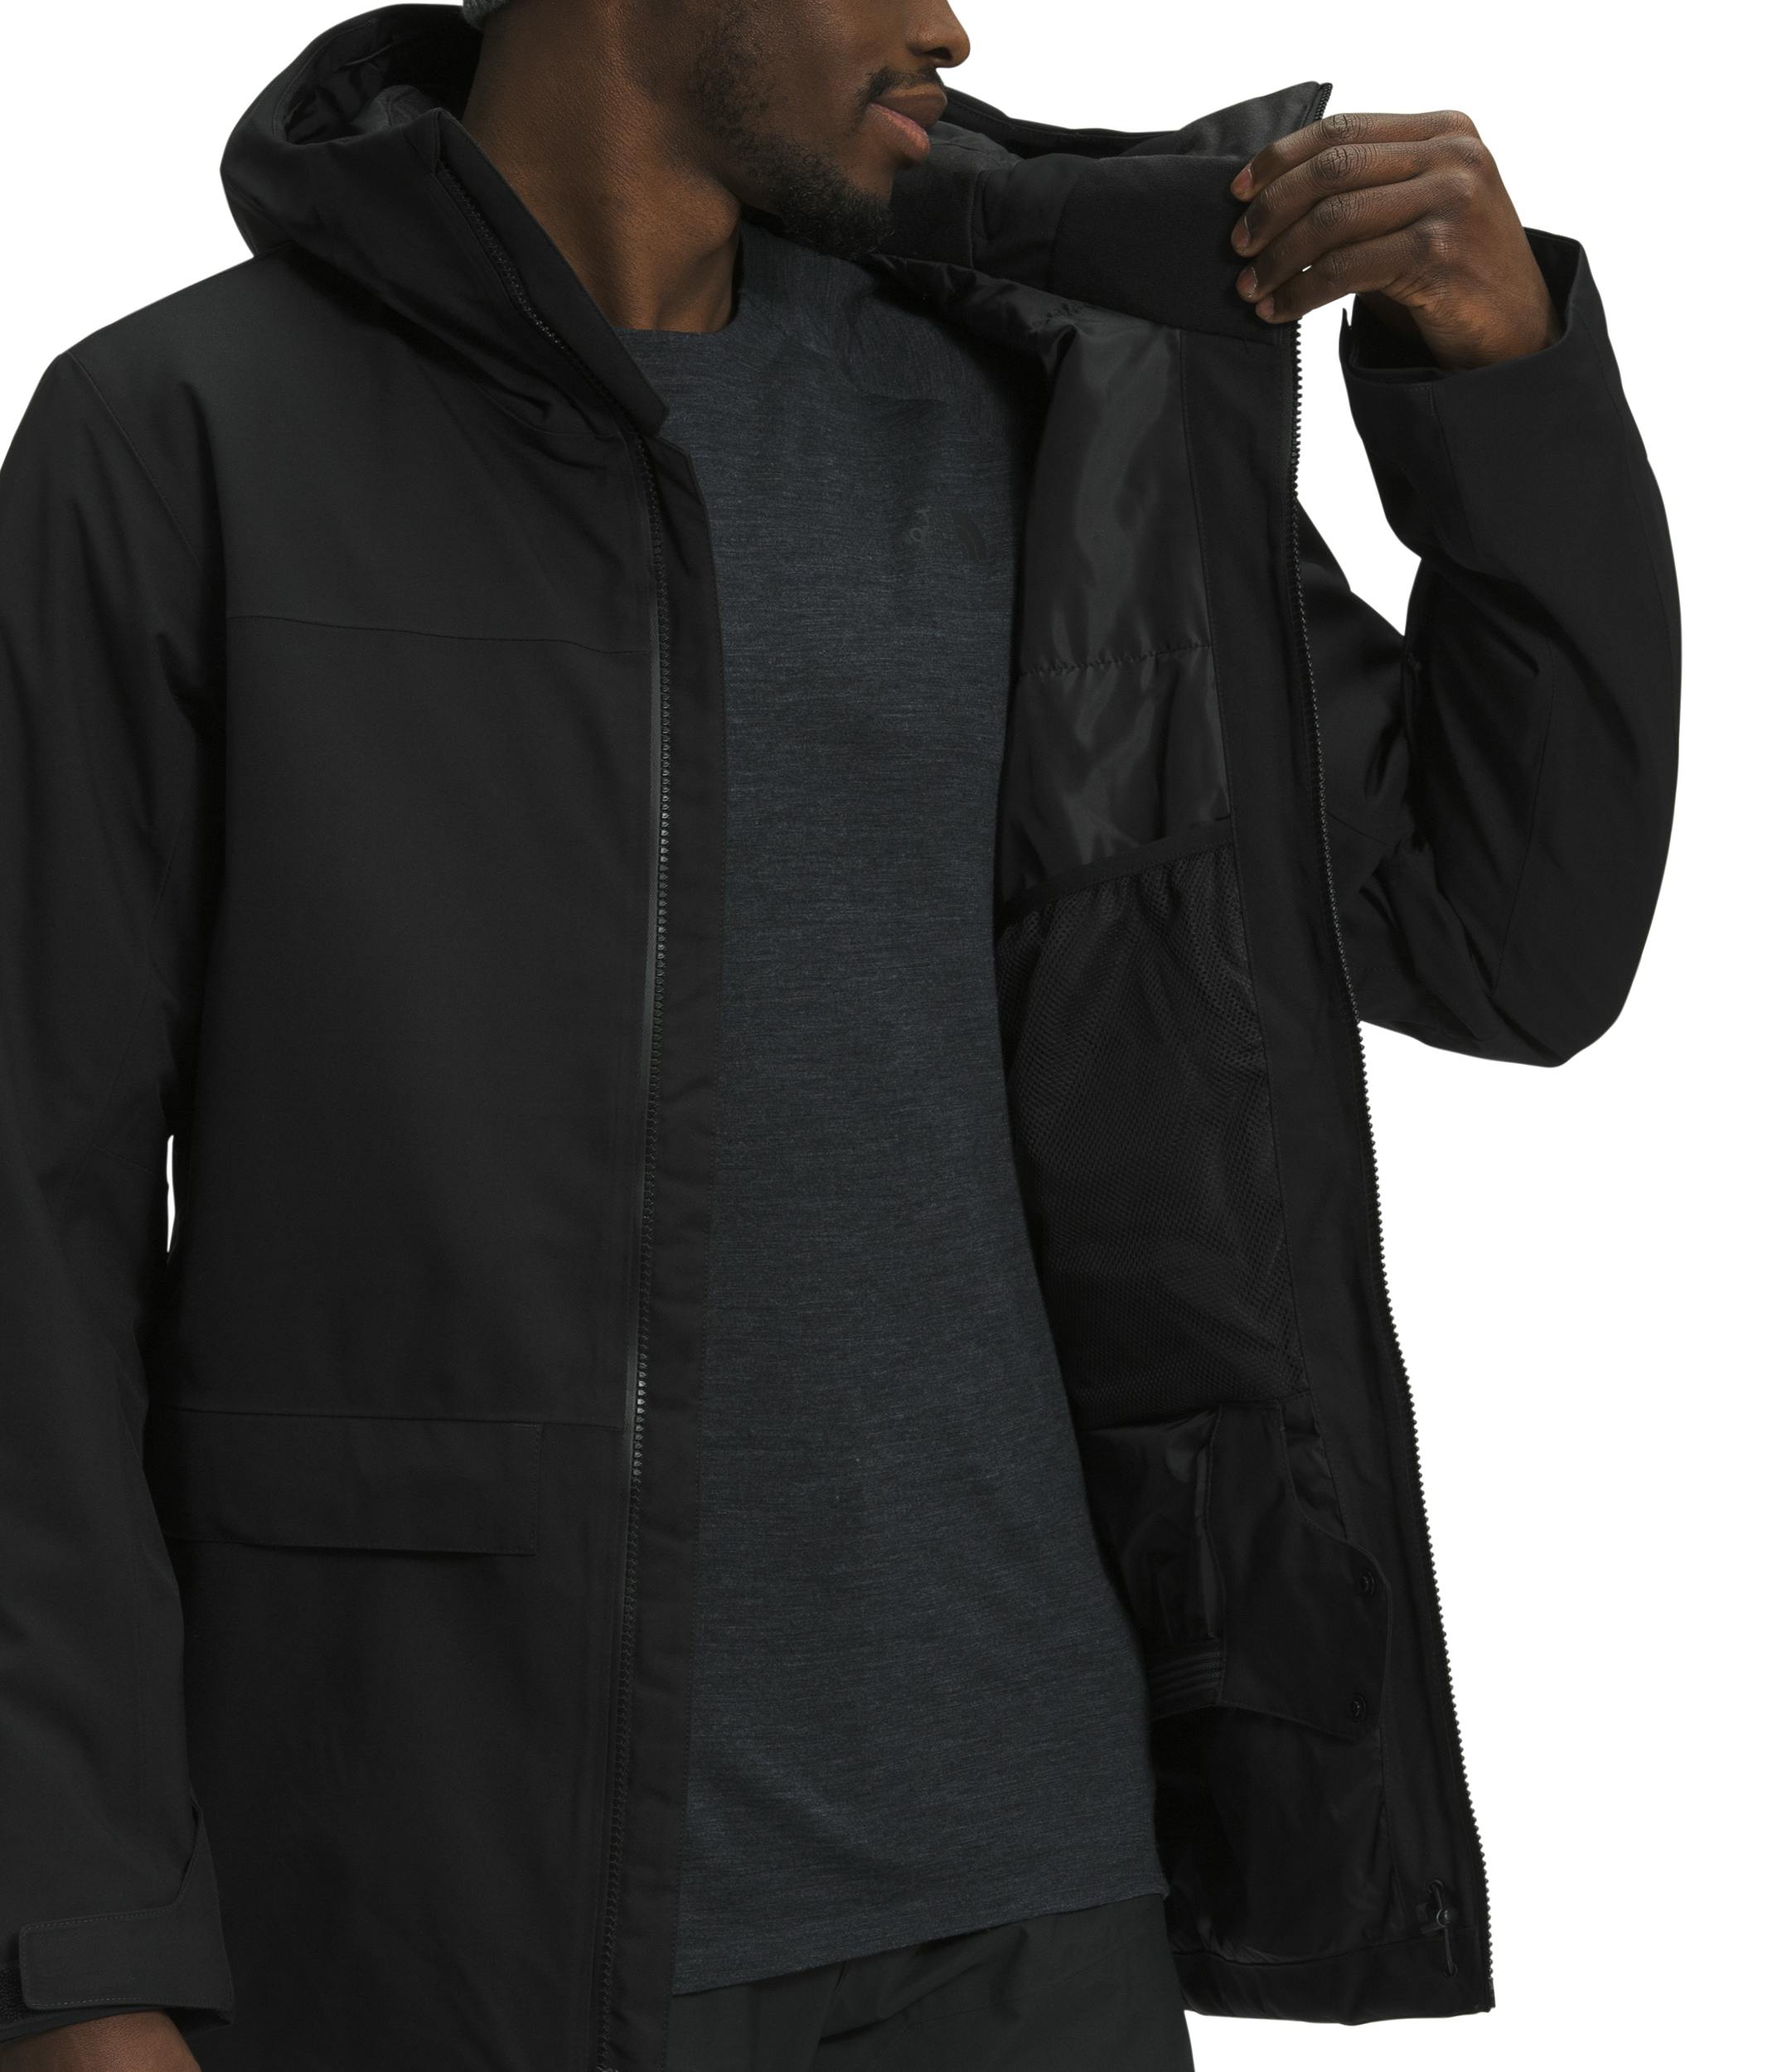 The North Face Men's Sickline 2L Insulated Jacket